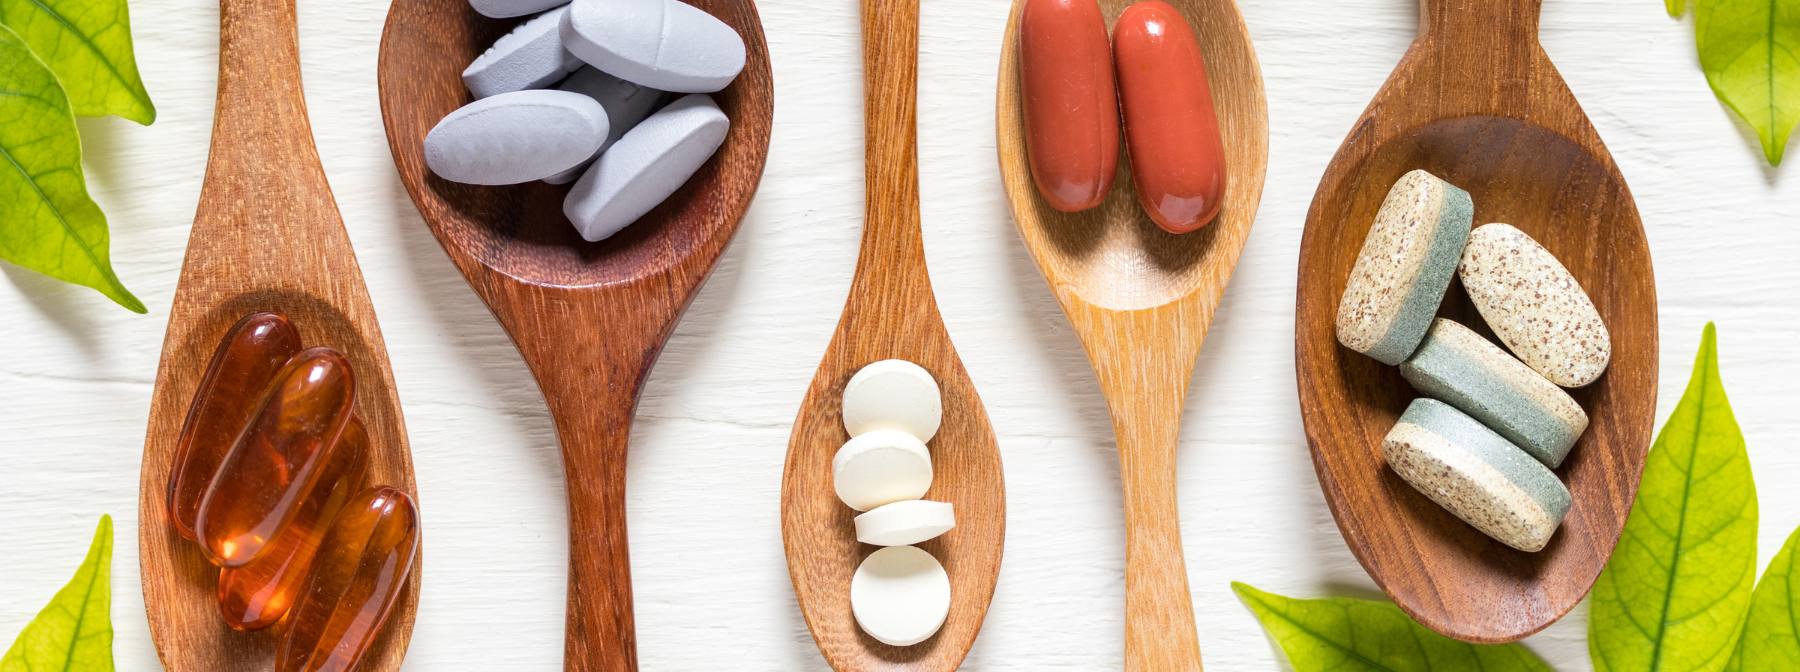 The Complete Guide To Vitamins, Minerals & Supplements To Boost Your Health